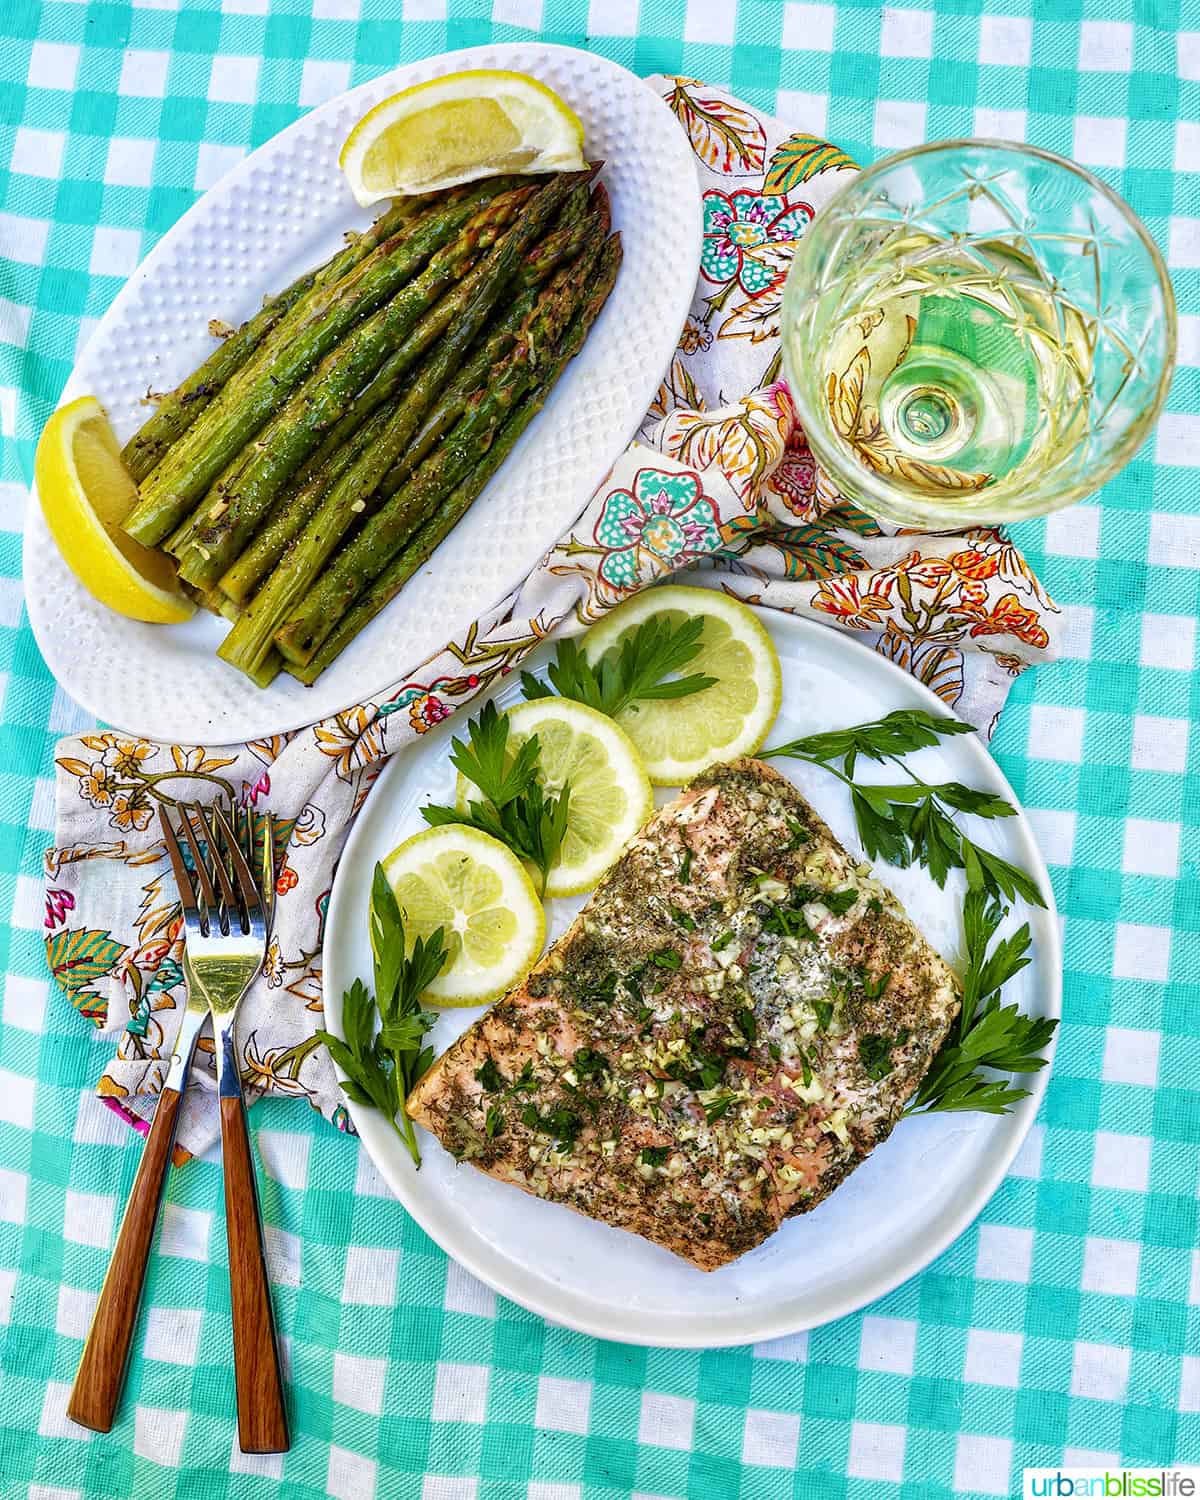 grilled salmon on a plate next to a plate of asparagus and glass of white wine.